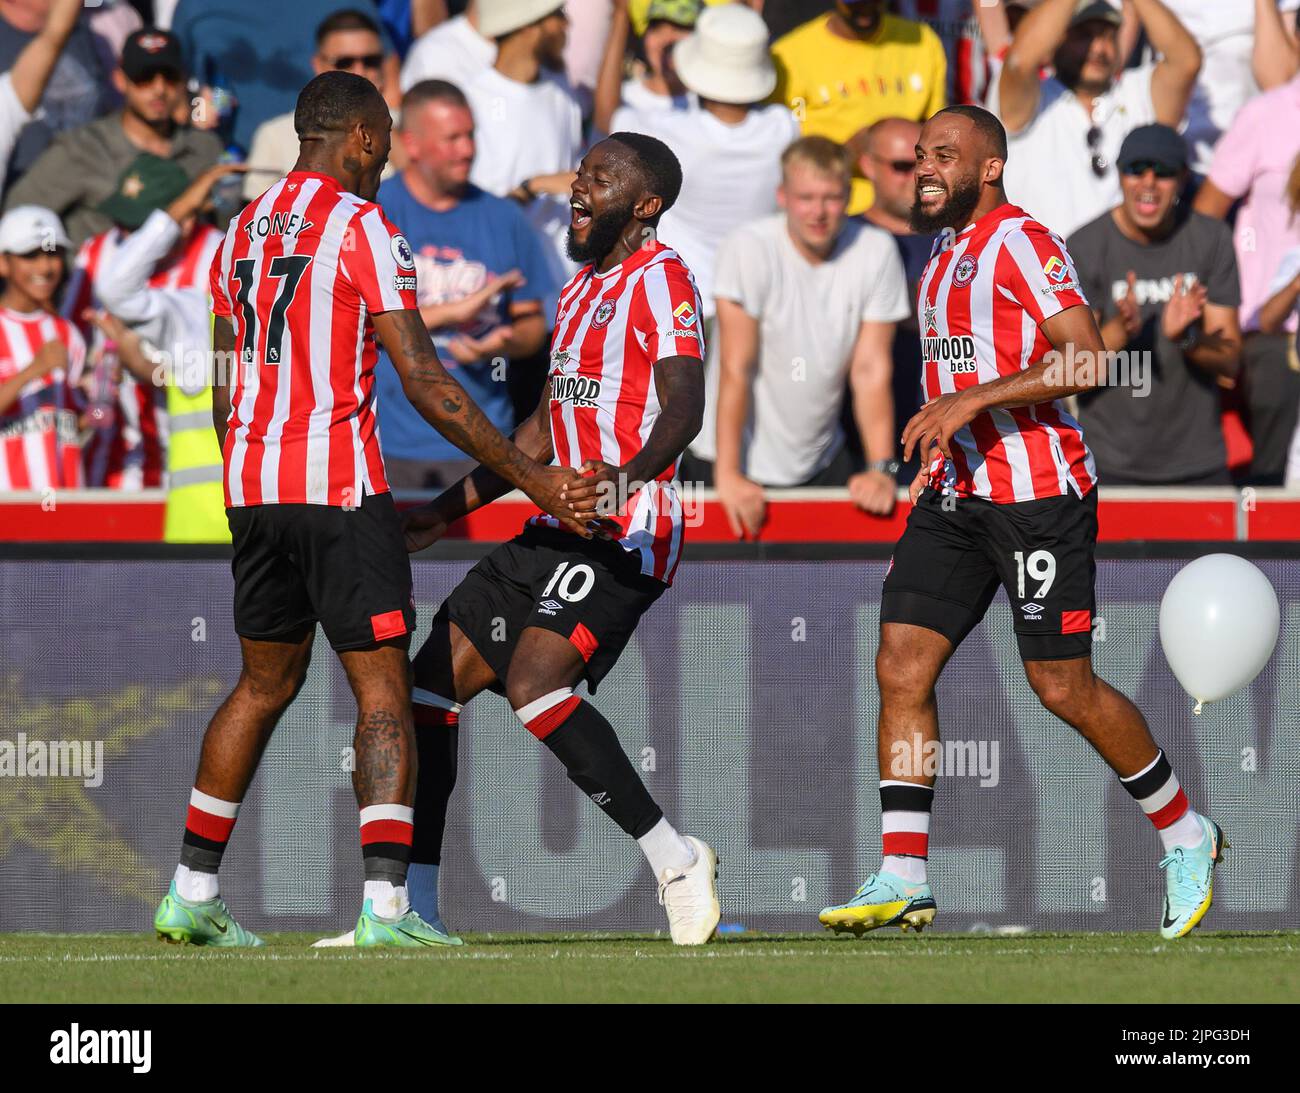 13 Aug 2022 - Brentford v Manchester United - Premier League - Gtech Community Stadium  Brentford's Josh Dasilva celebrates his goal with Ivan Toney and Bryan Mbeumo during the Premier League match at the Gtech Community Stadium, London.  Picture : Mark Pain / Alamy Live News Stock Photo